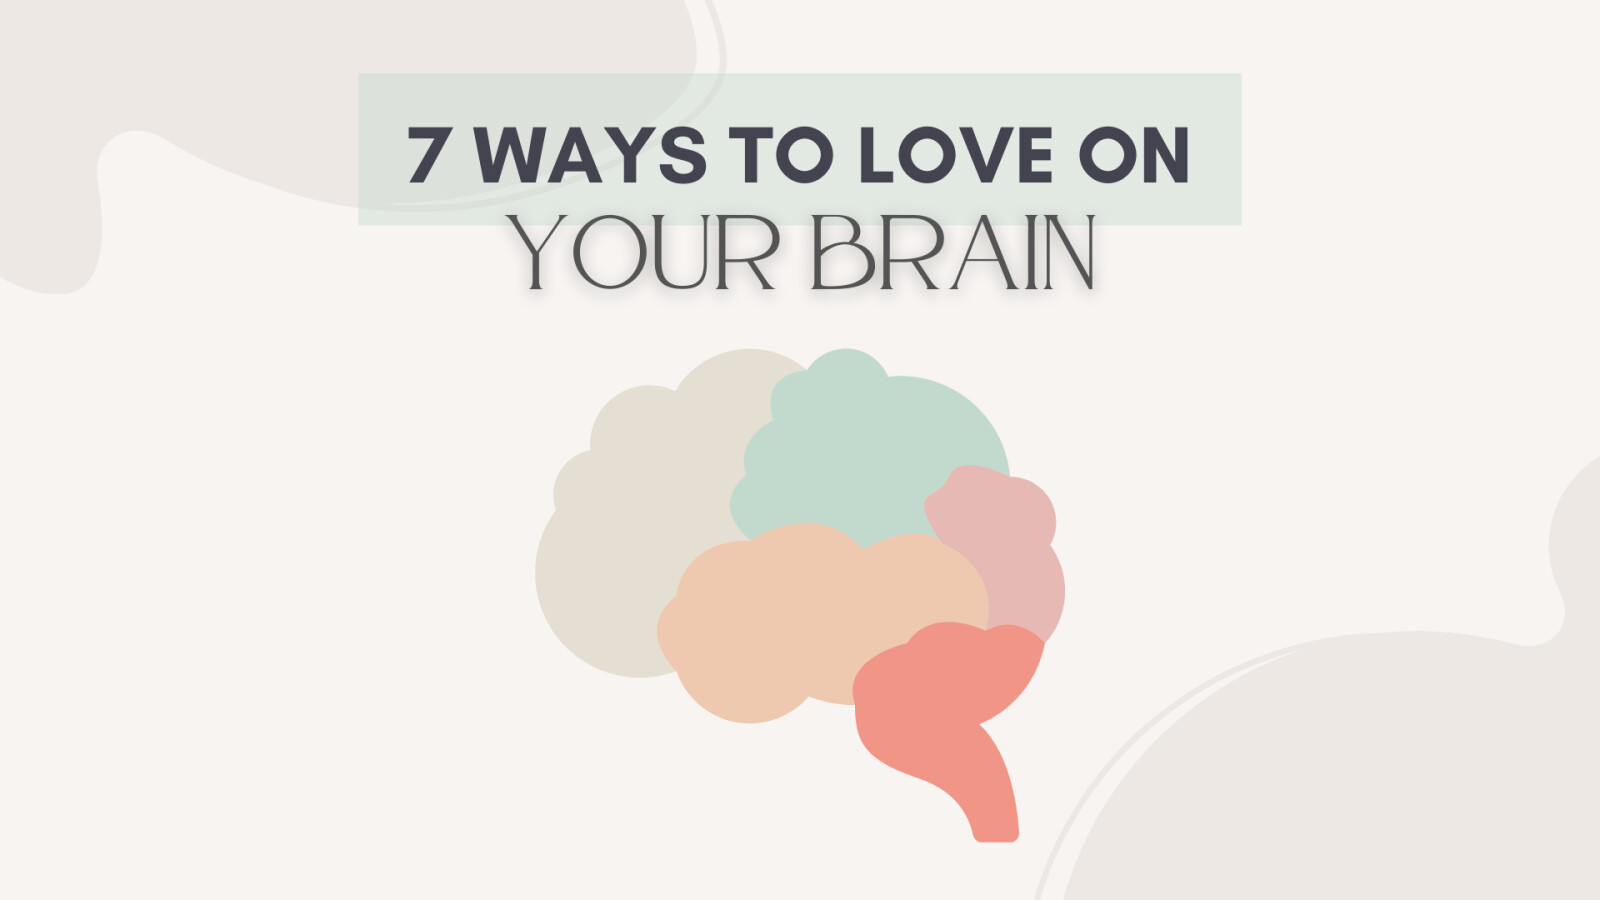 Love on Your Brain!